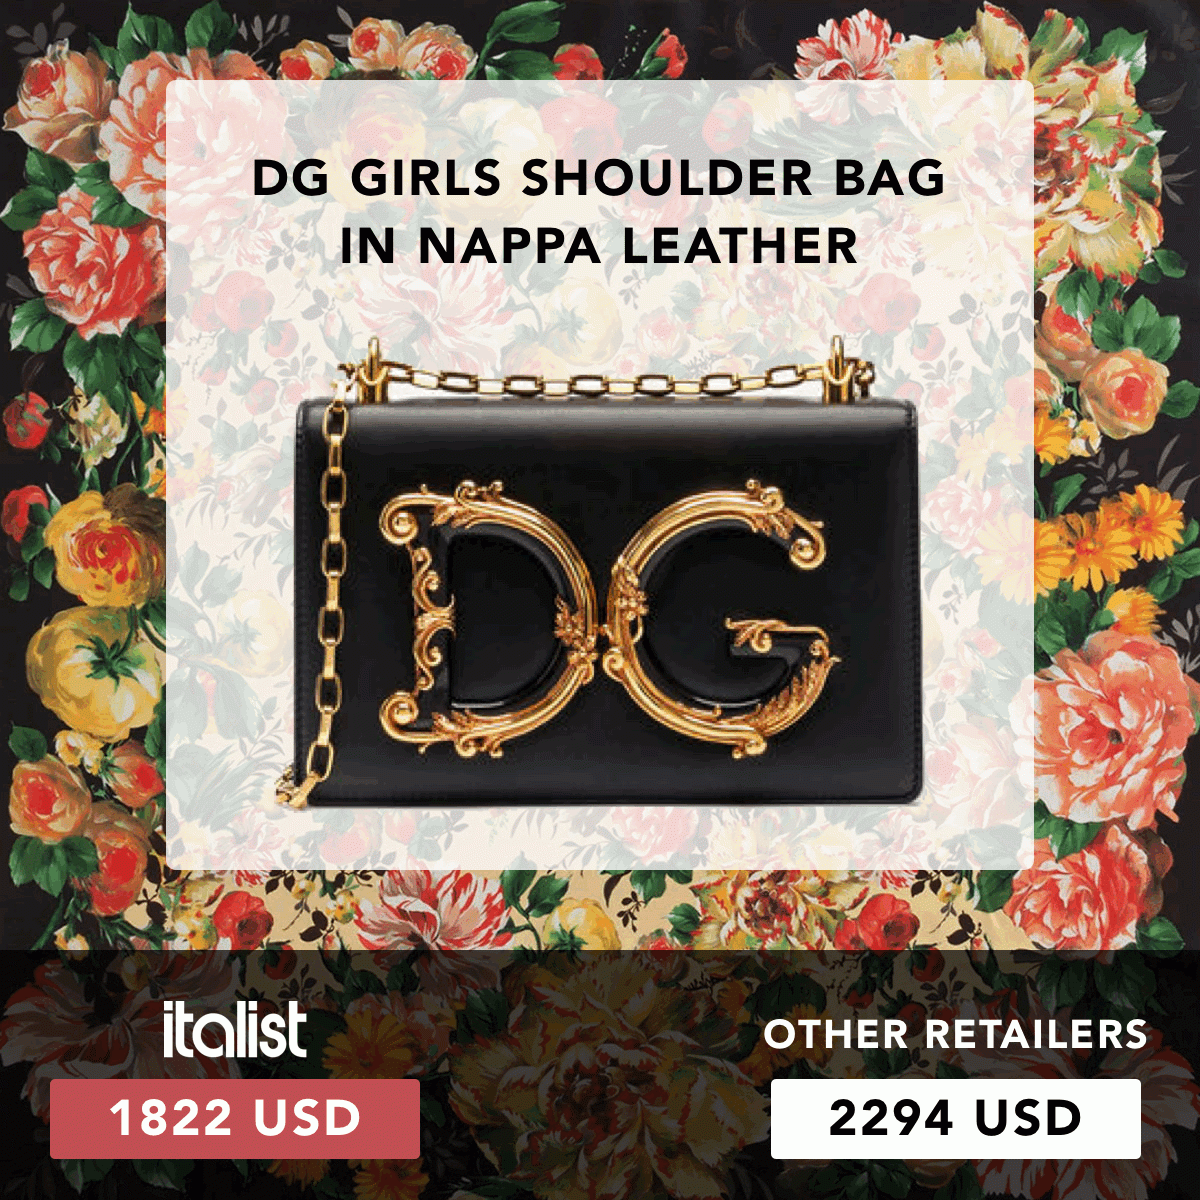 Exclusive sale invitation: Save up to 29% on iconic Dolce & Gabbana  shoulder bag - italist Email Archive